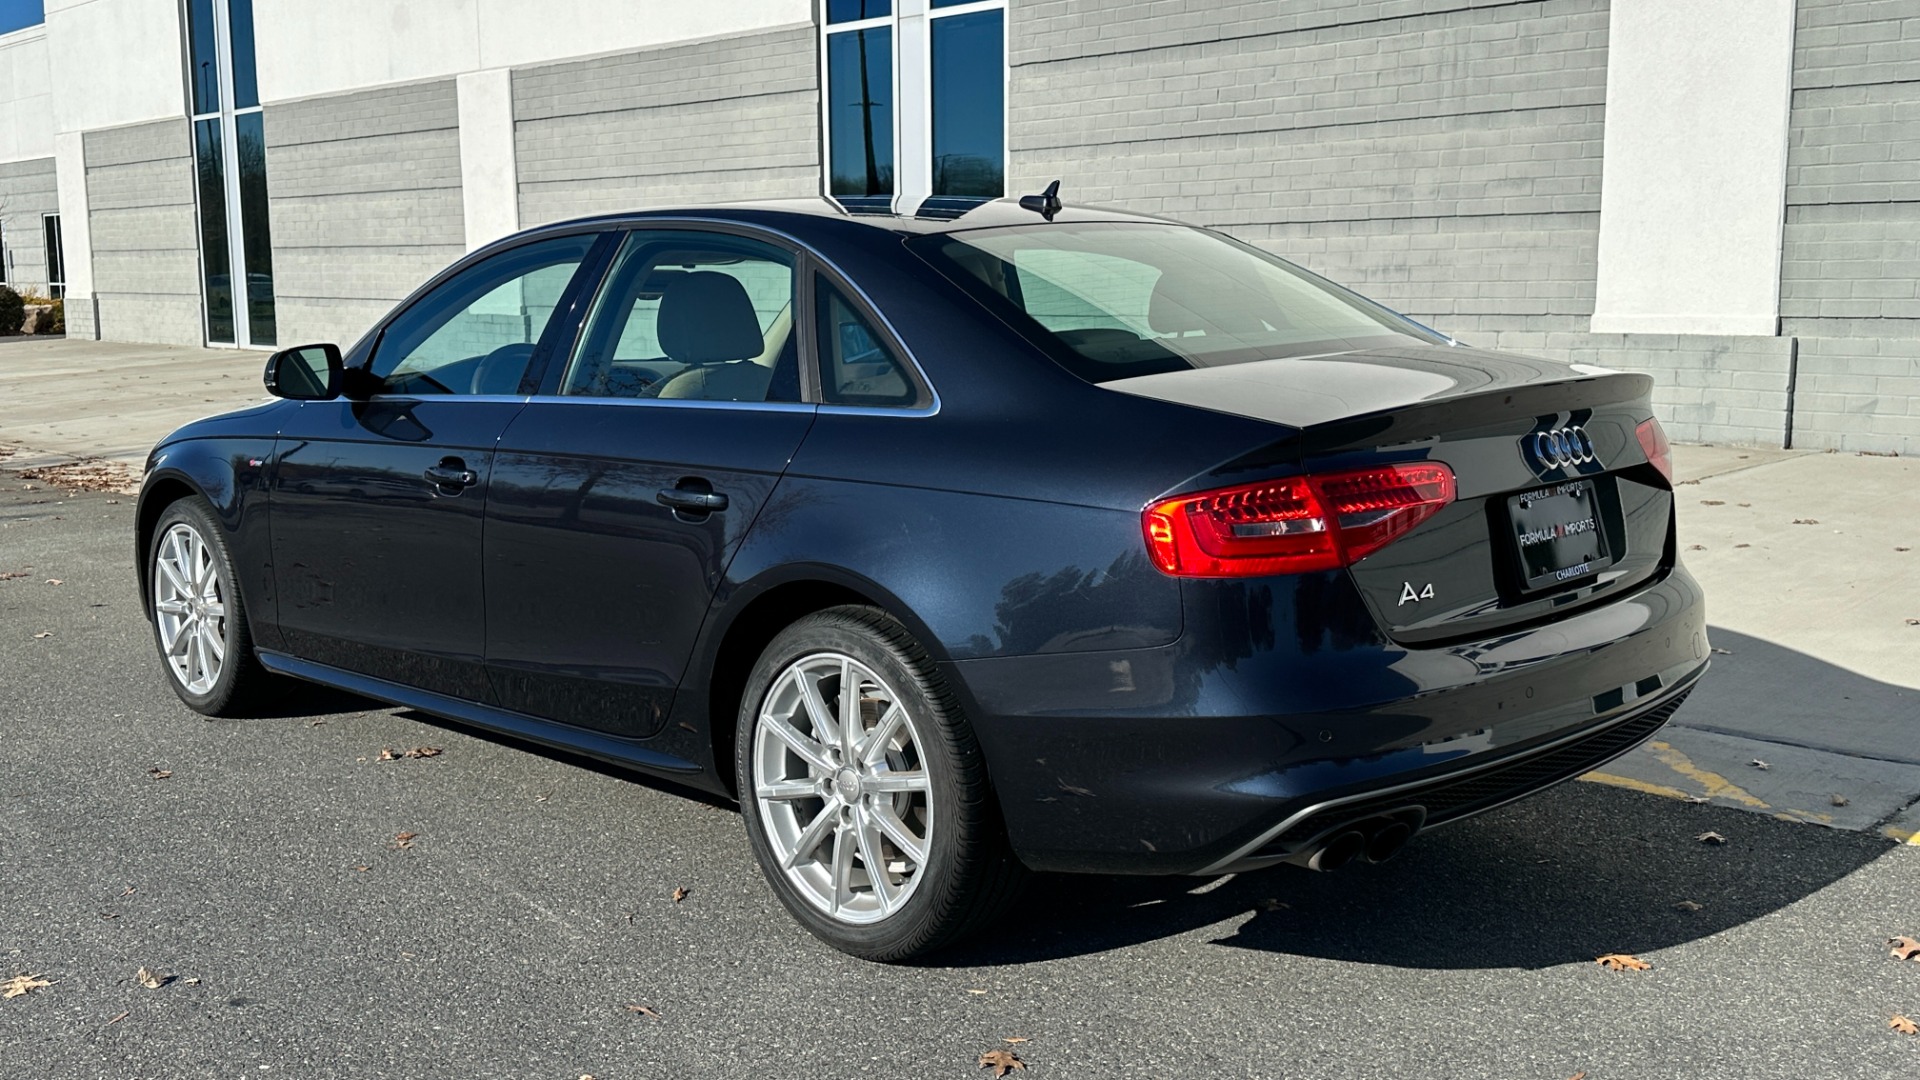 Used 2014 Audi A4 PREMIUM PLUS / NAVIGATION PLUS / BLINDSPOT ASSIST / LEATHER / SUNROOF for sale $19,298 at Formula Imports in Charlotte NC 28227 4